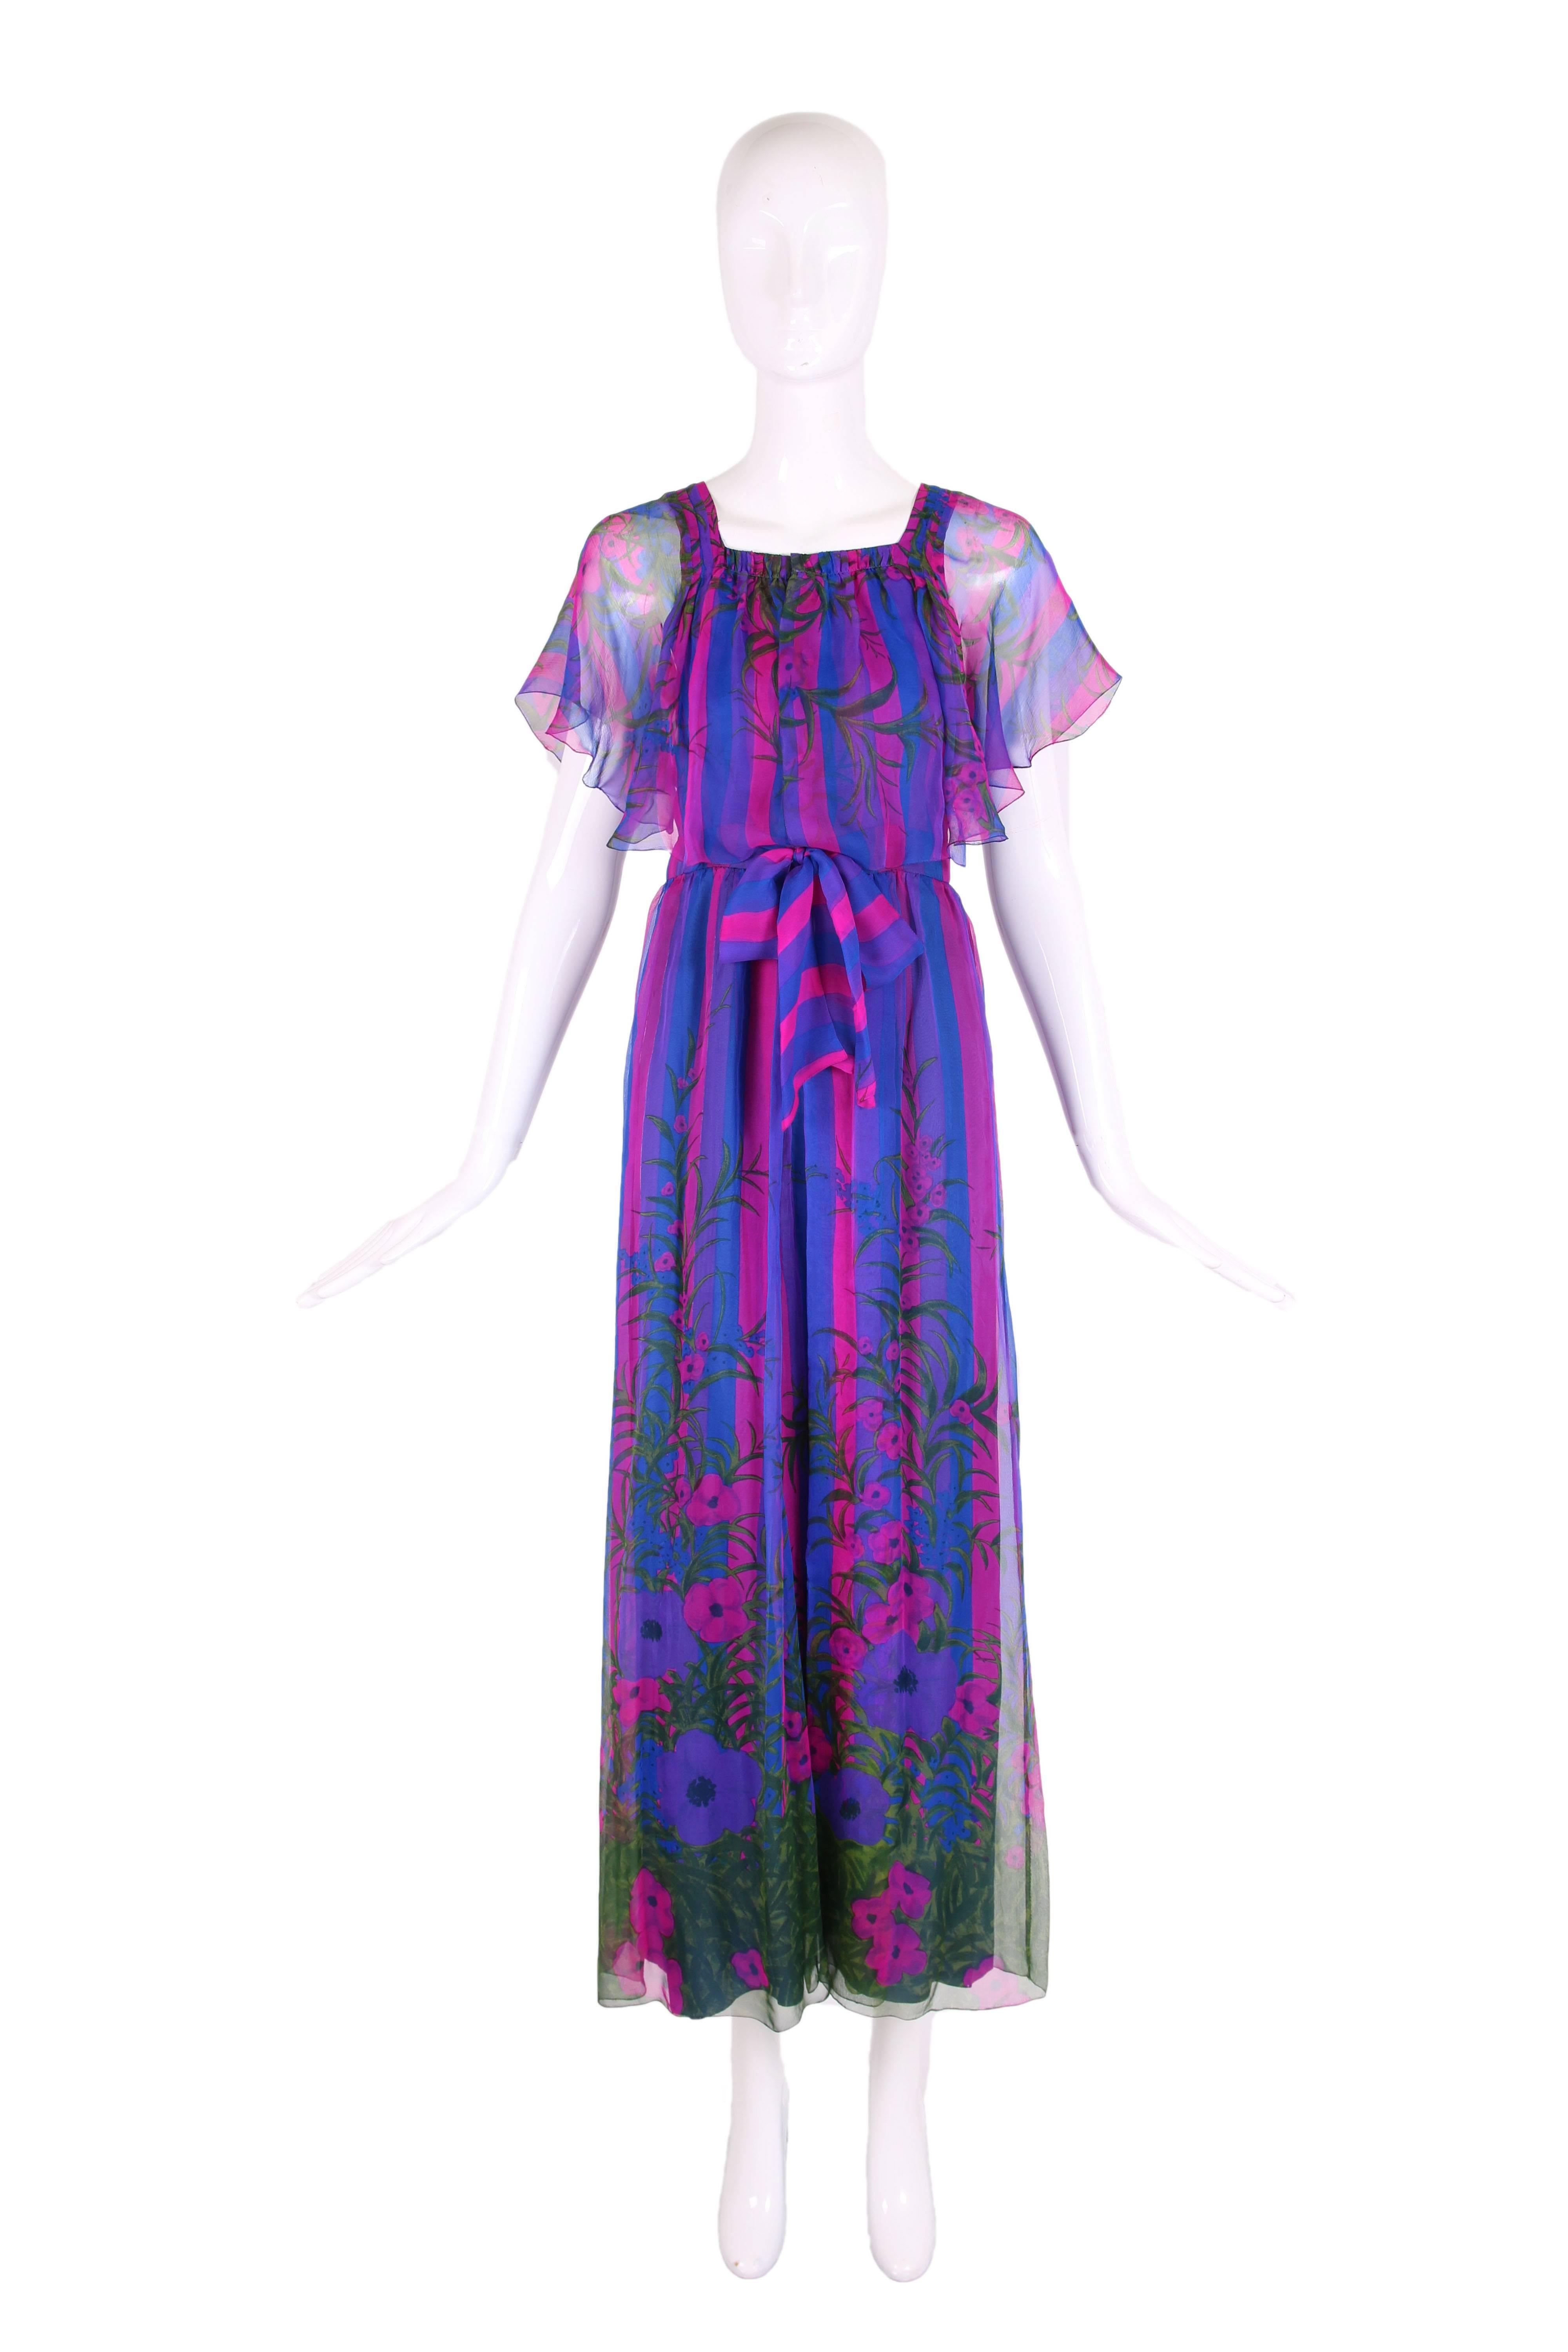 Unlabeled couture chiffon floral and striped sleeveless maxi dress in purple, fuchsia, navy blue, and green. The dress has a square neckline, flutter sleeves and waist ties. Fully lined. In excellent condition with missing label but seamstress tape